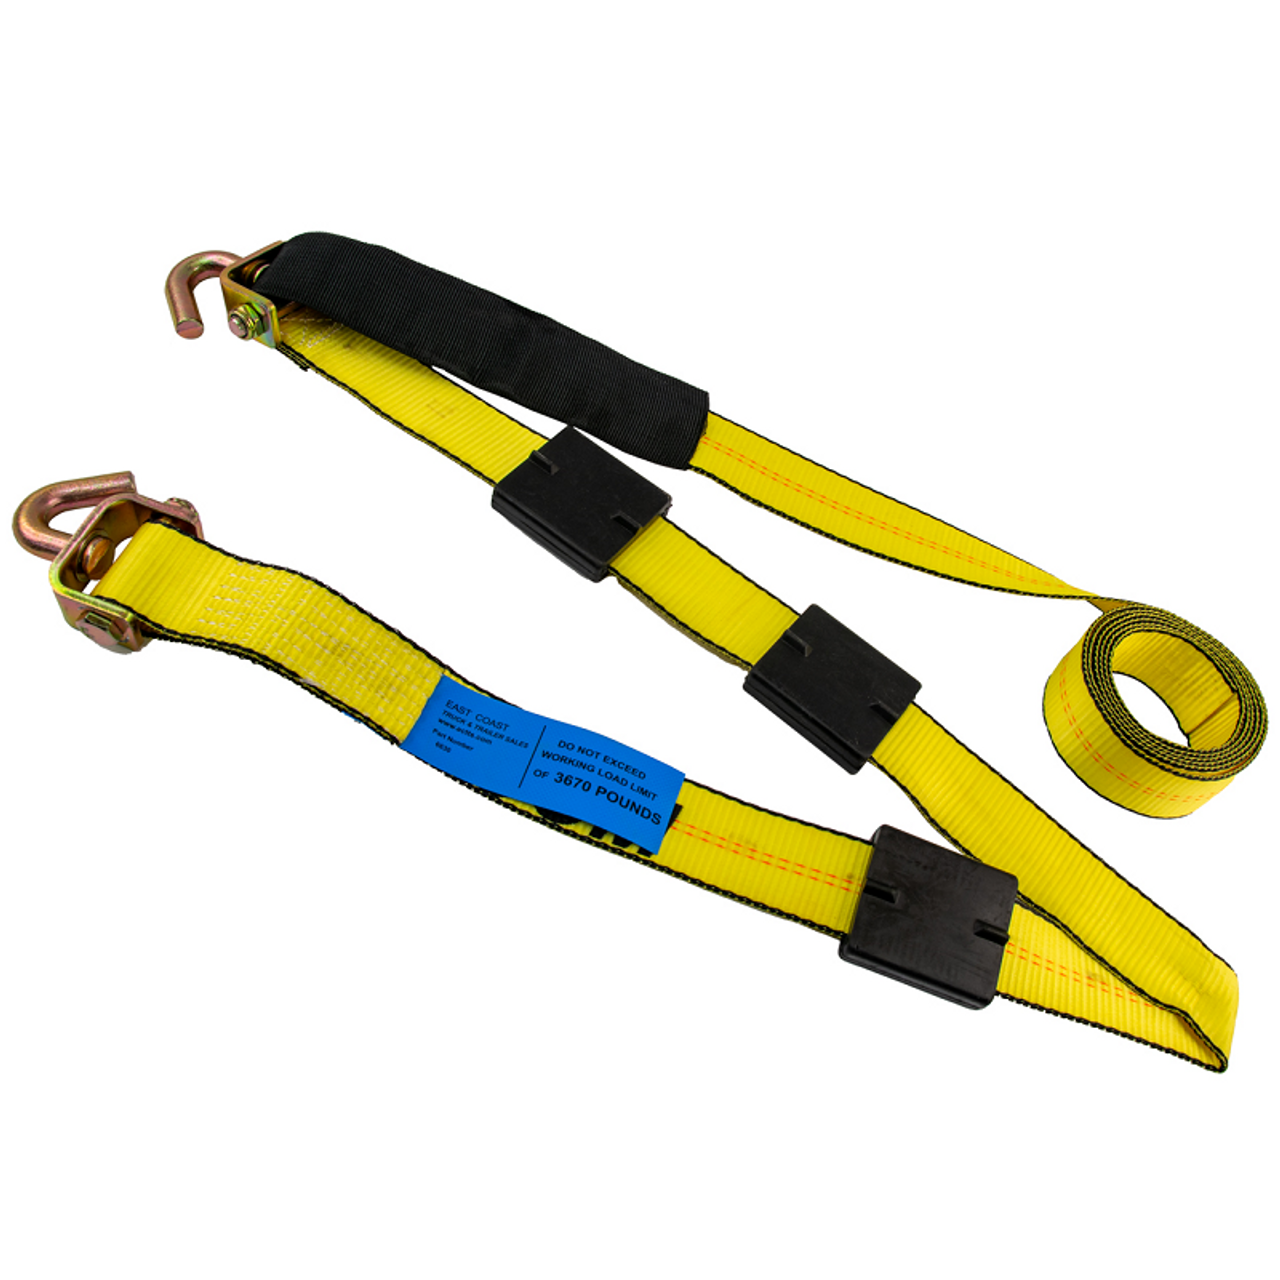 2 inch Custom Replacement Strap with Swivel Hooks